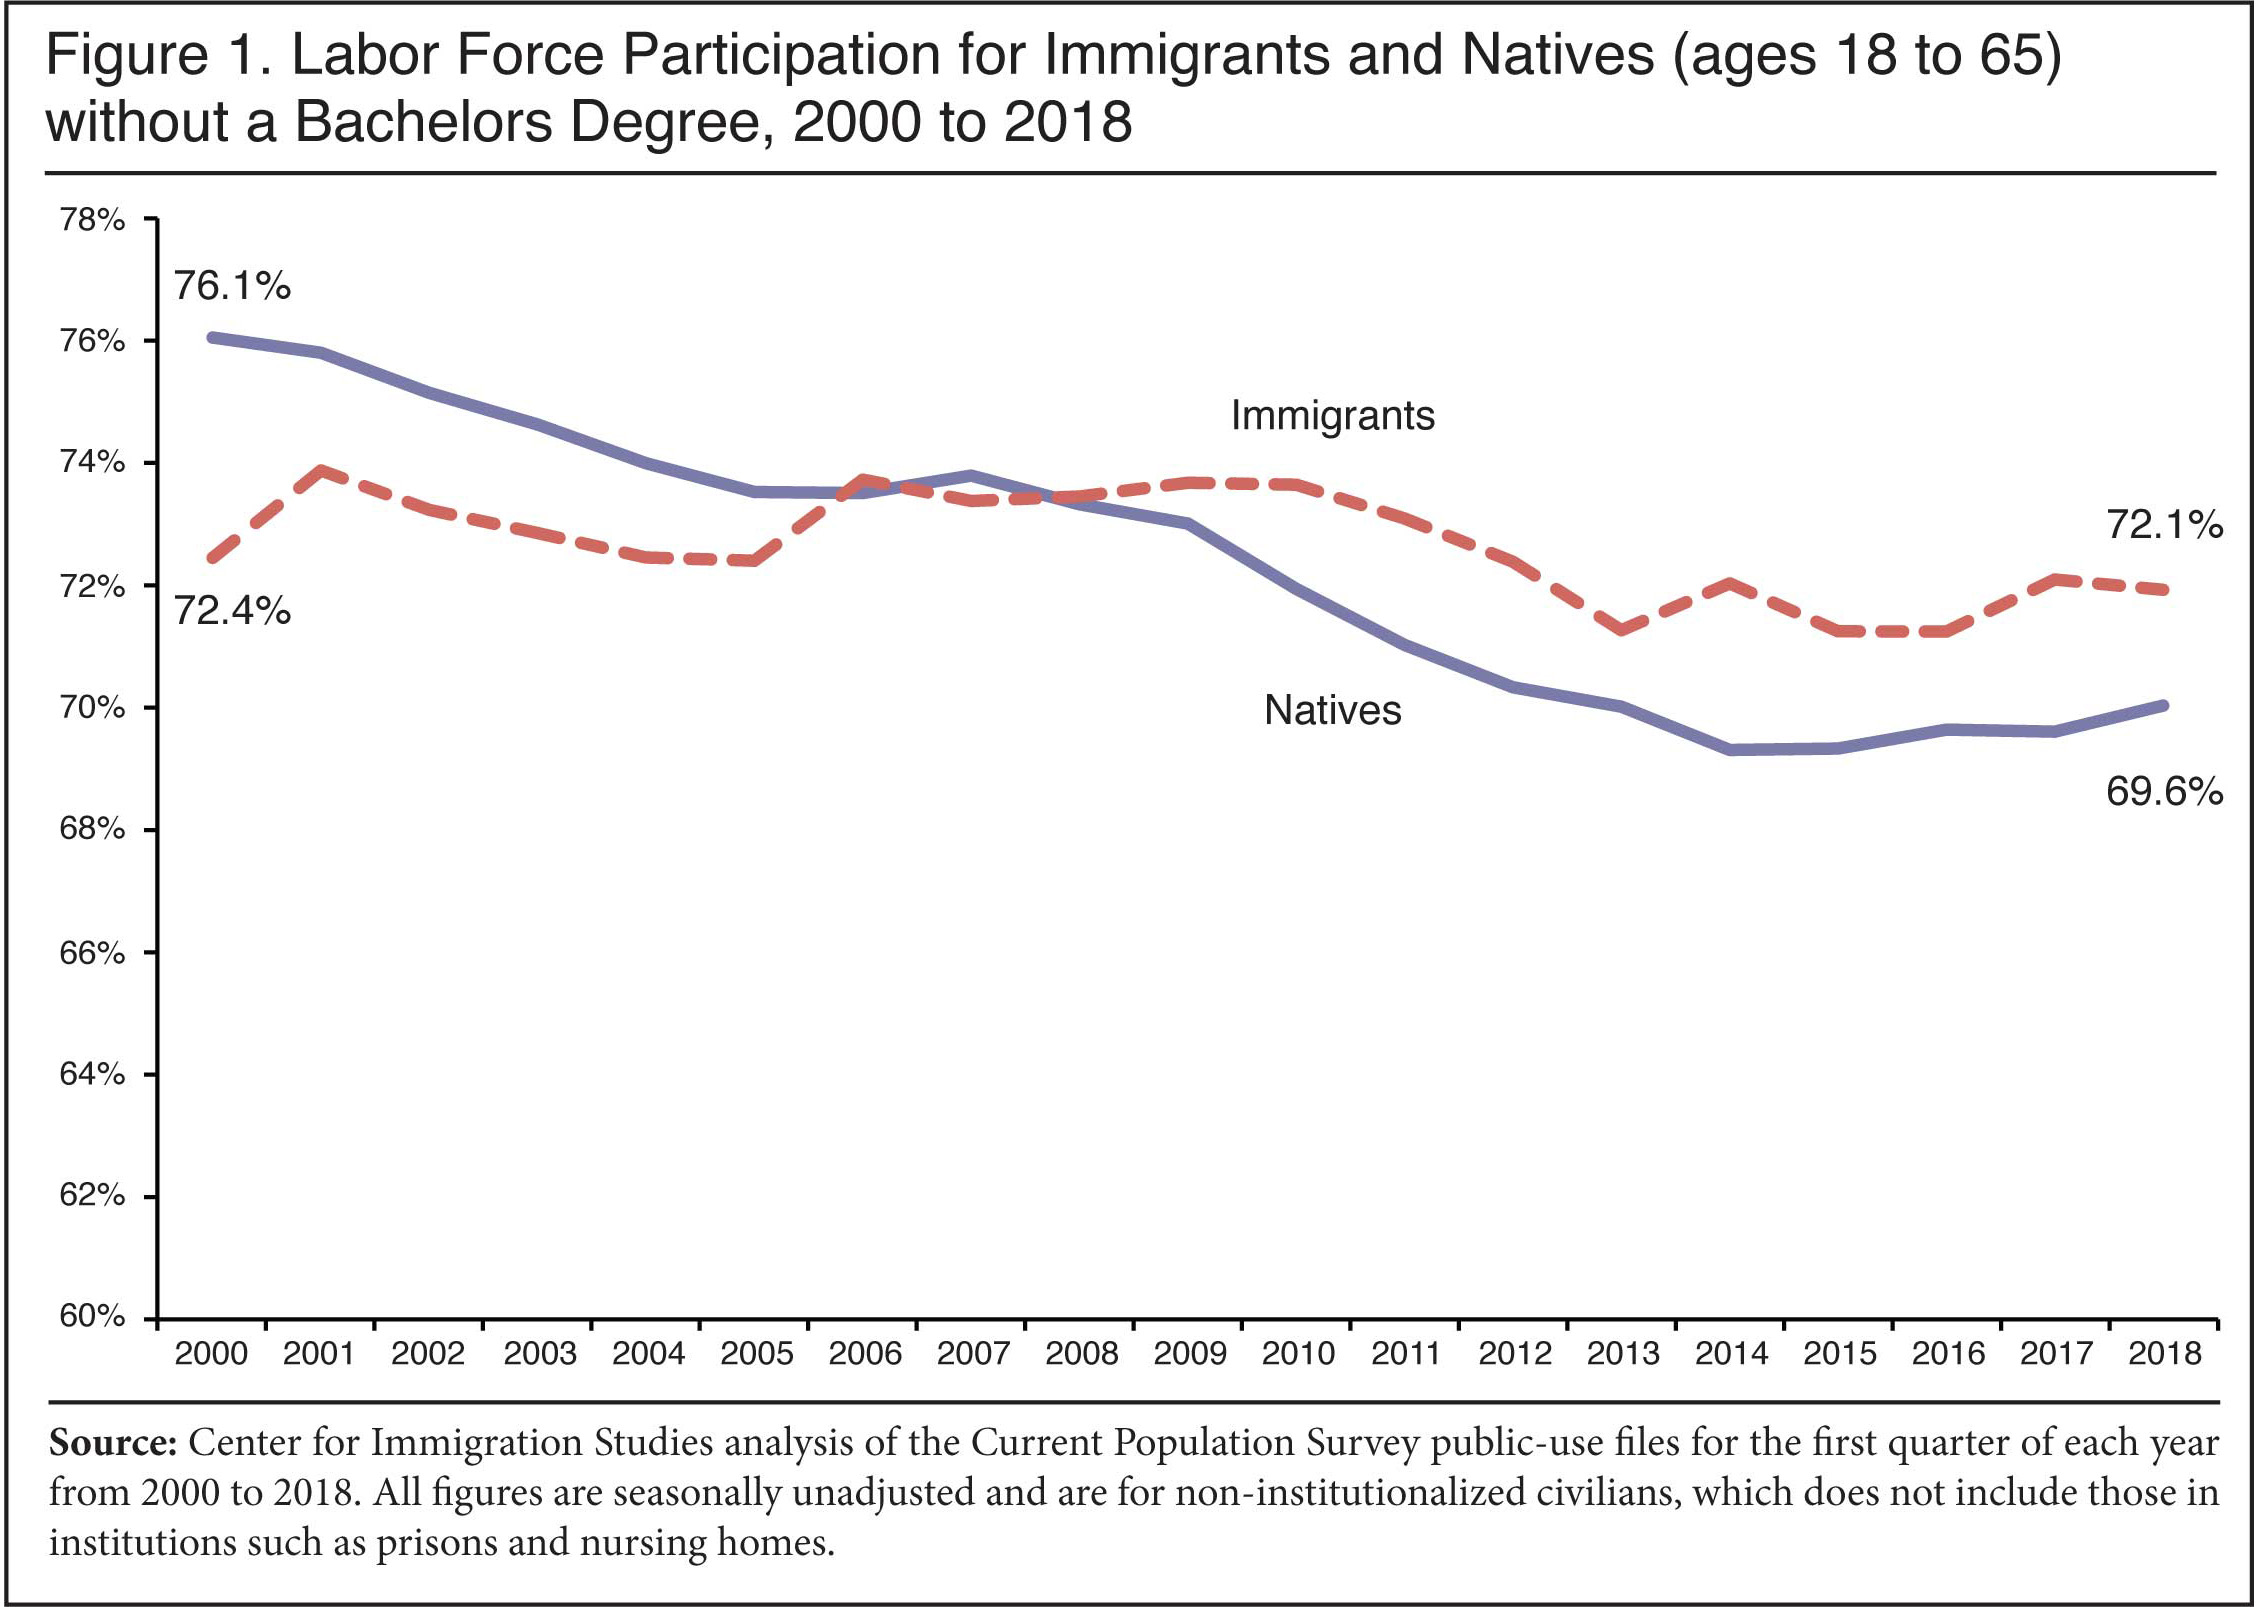 Graph: Labor Force Participation for Immigrants and Natives without a Bachelors Degree, 2000 to 2018